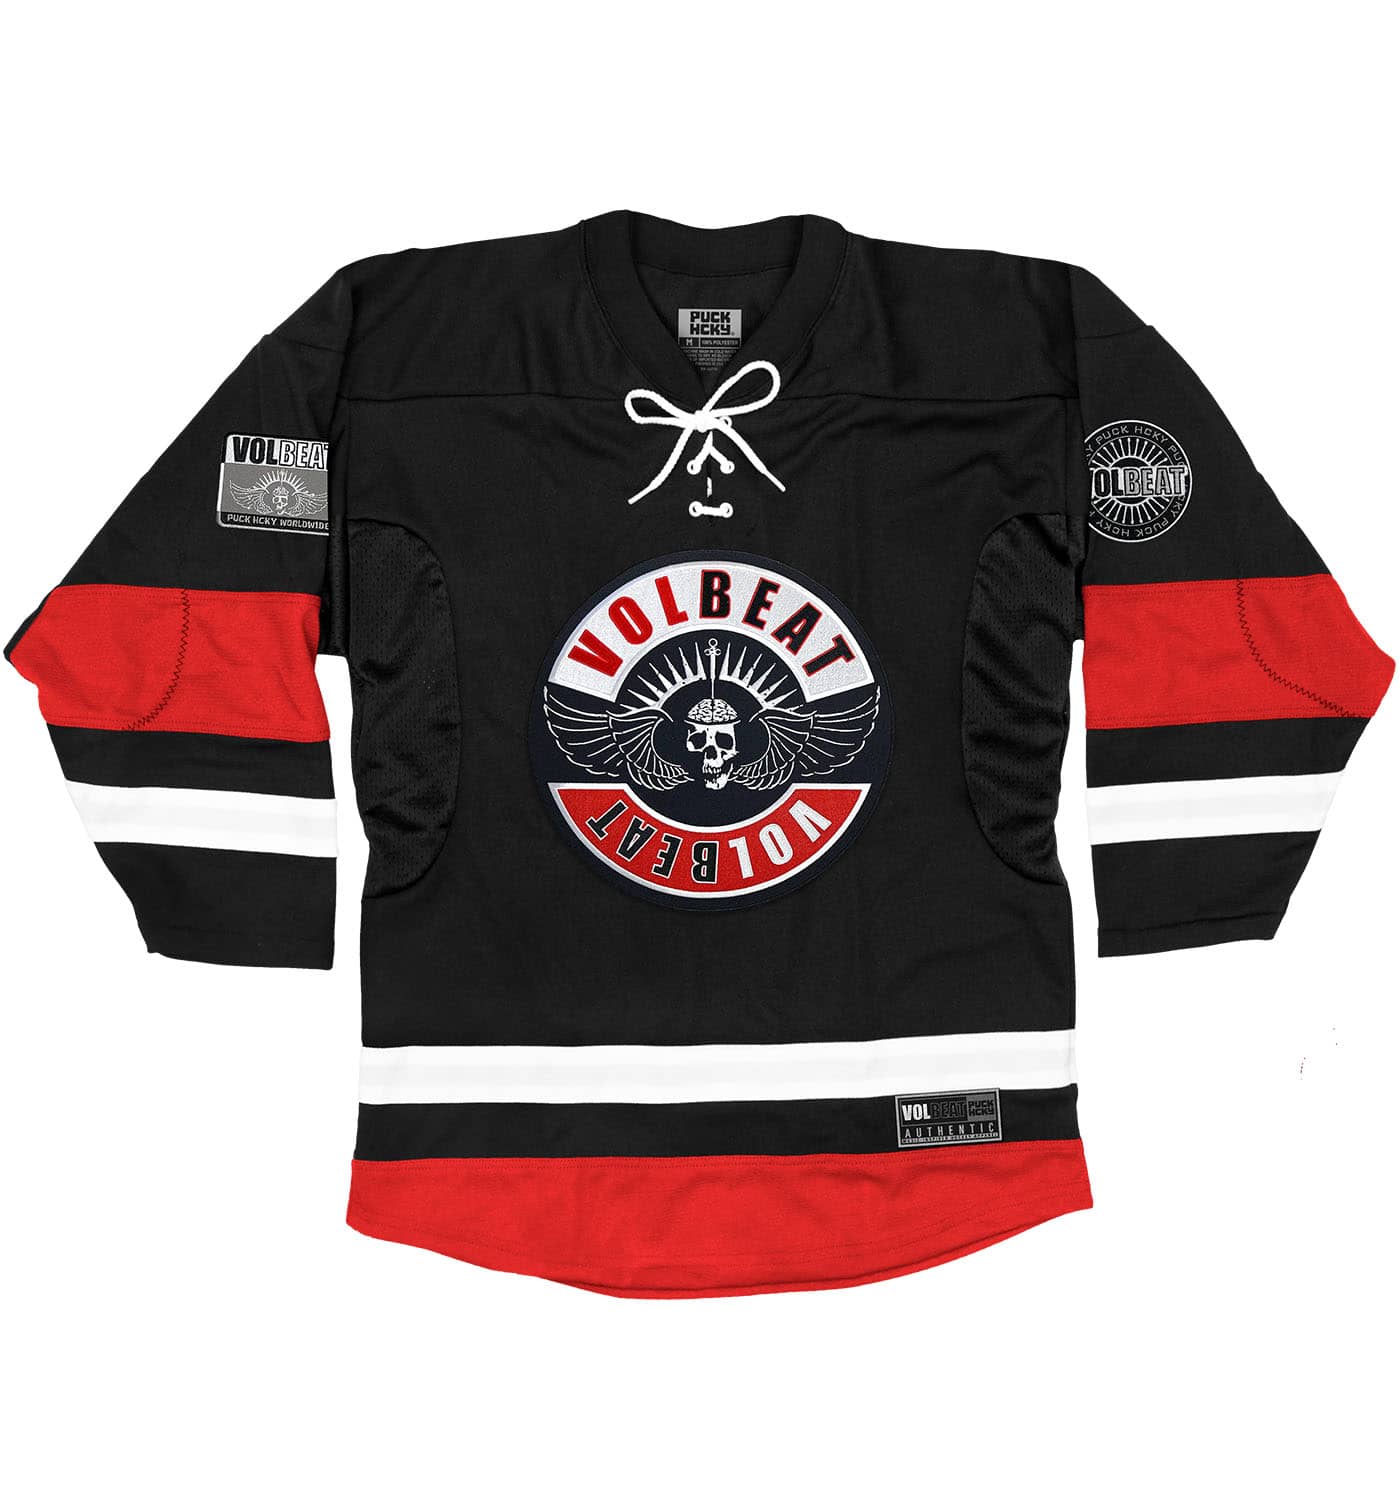 VOLBEAT ‘THE CIRCLE’ deluxe hockey jersey in black, white, and red front view